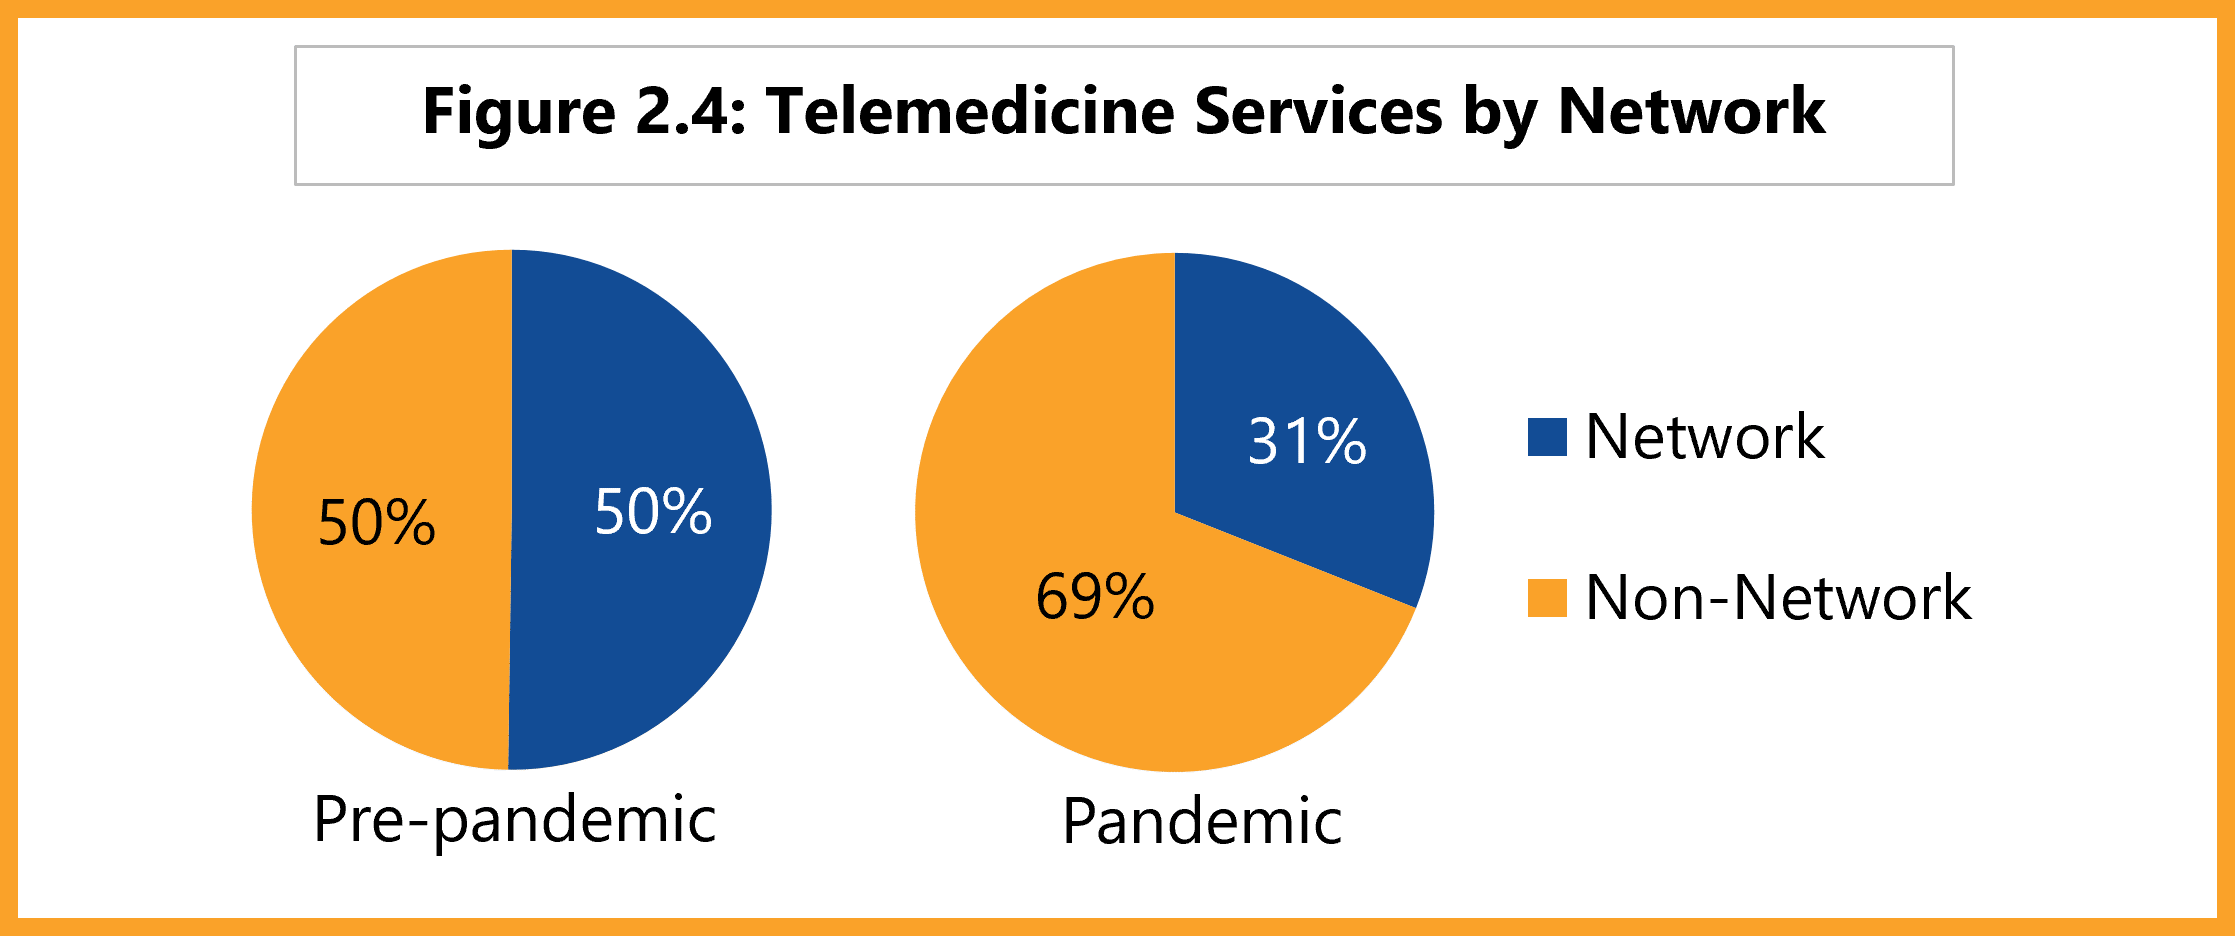 Telemedicine services by network. Pre-pandemic: 50% network, 50% non-network. Pandemic: 31% network, 69% non-network.